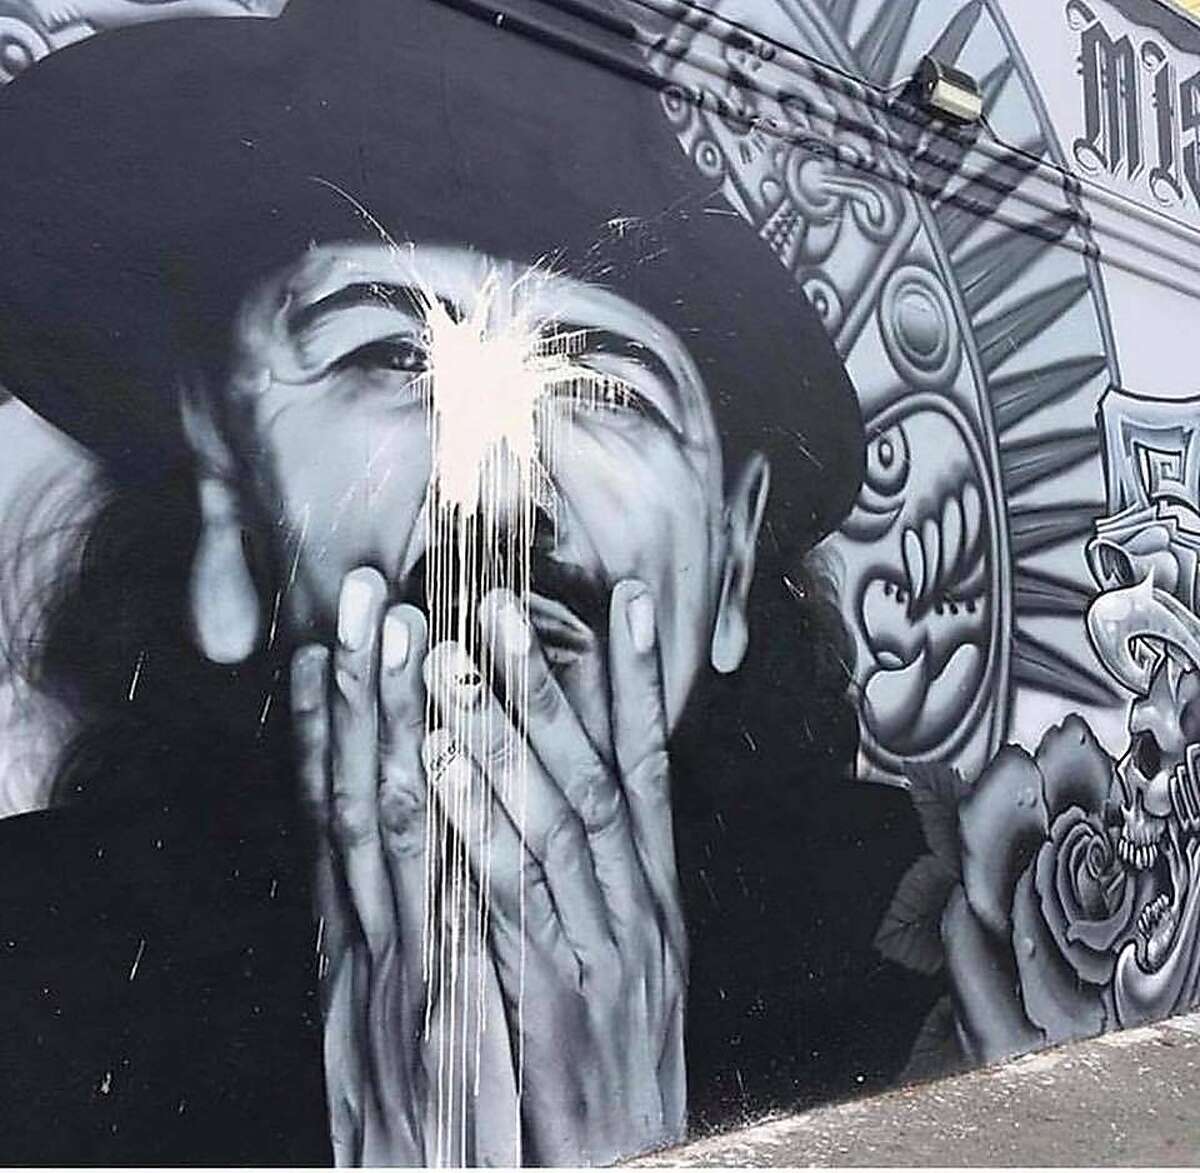 A mural of Carlos Santana at 19th and Mission streets was vandalized on July 14, 2018 with what appeared to be white paint. The muralist later restored the mural.